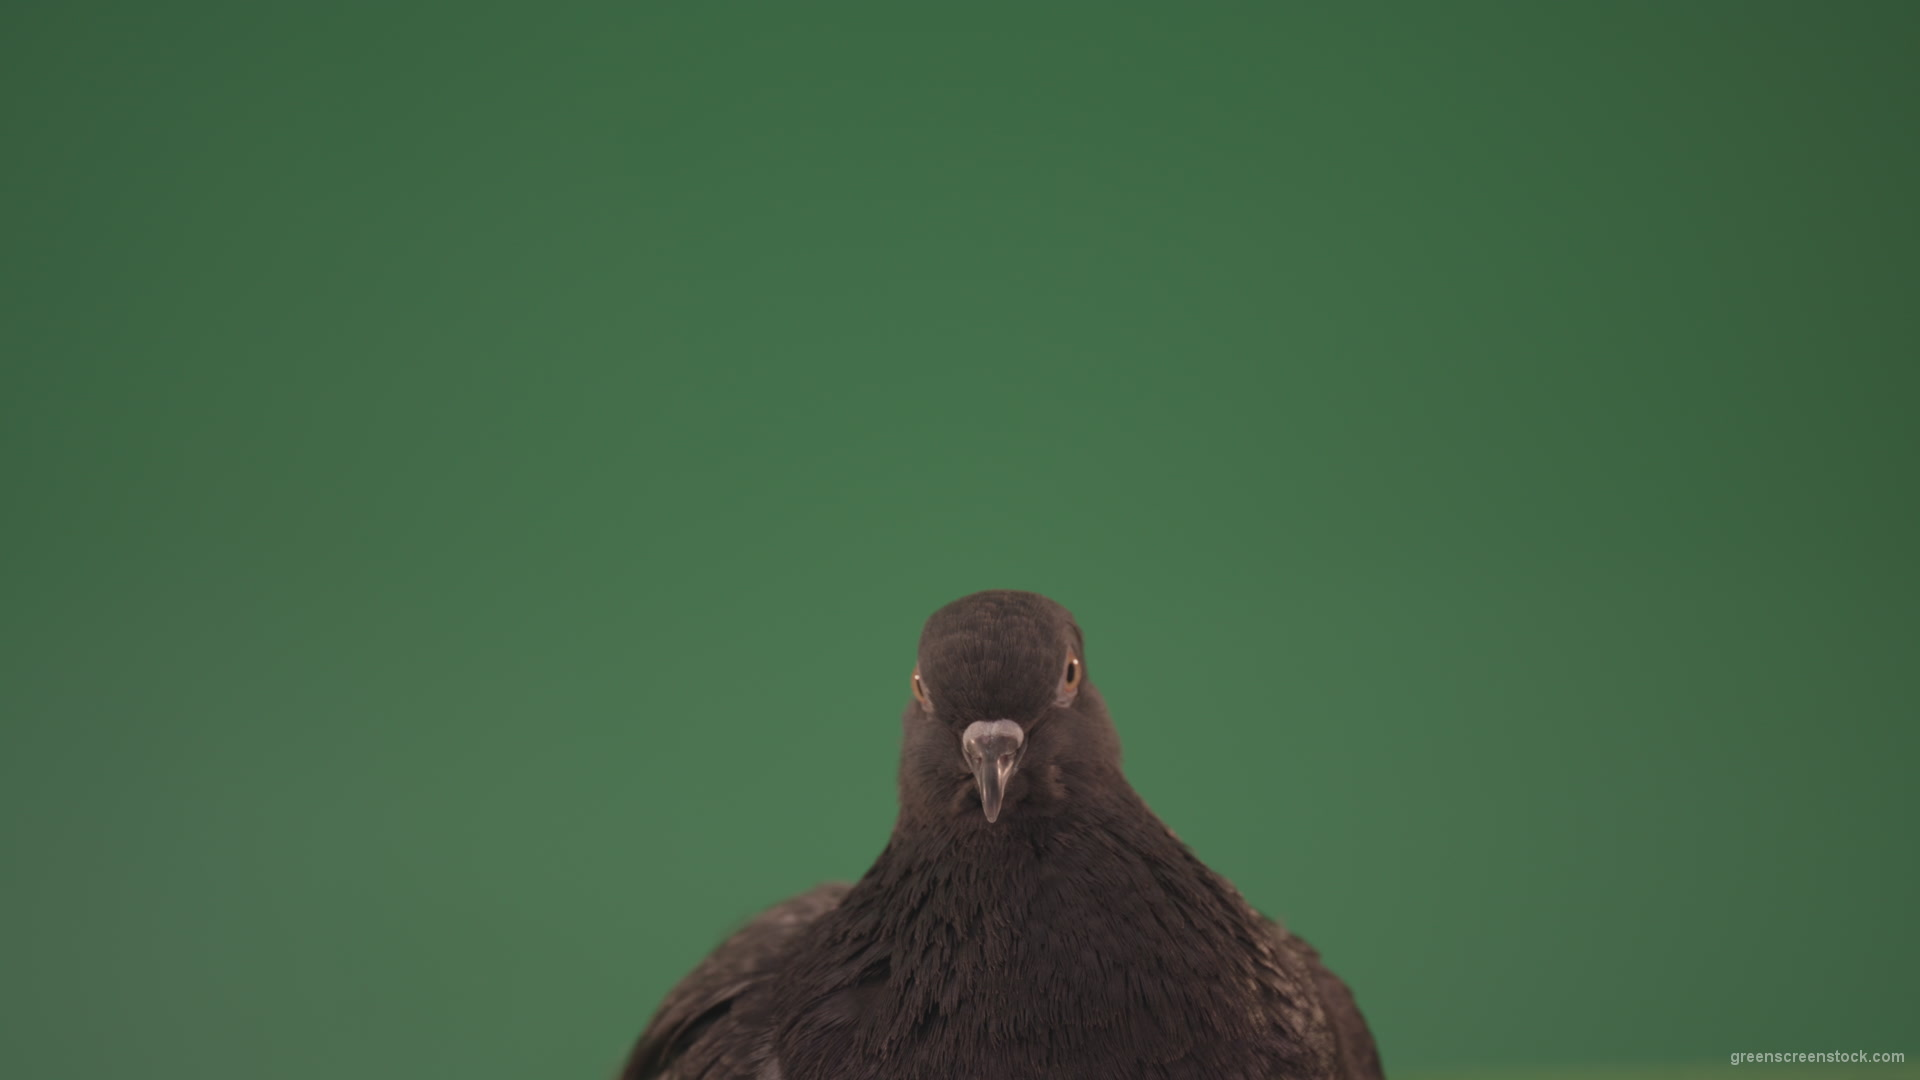 Pigeon-came-to-rest-after-a-long-flight-isolated-on-chromakey-background_007 Green Screen Stock